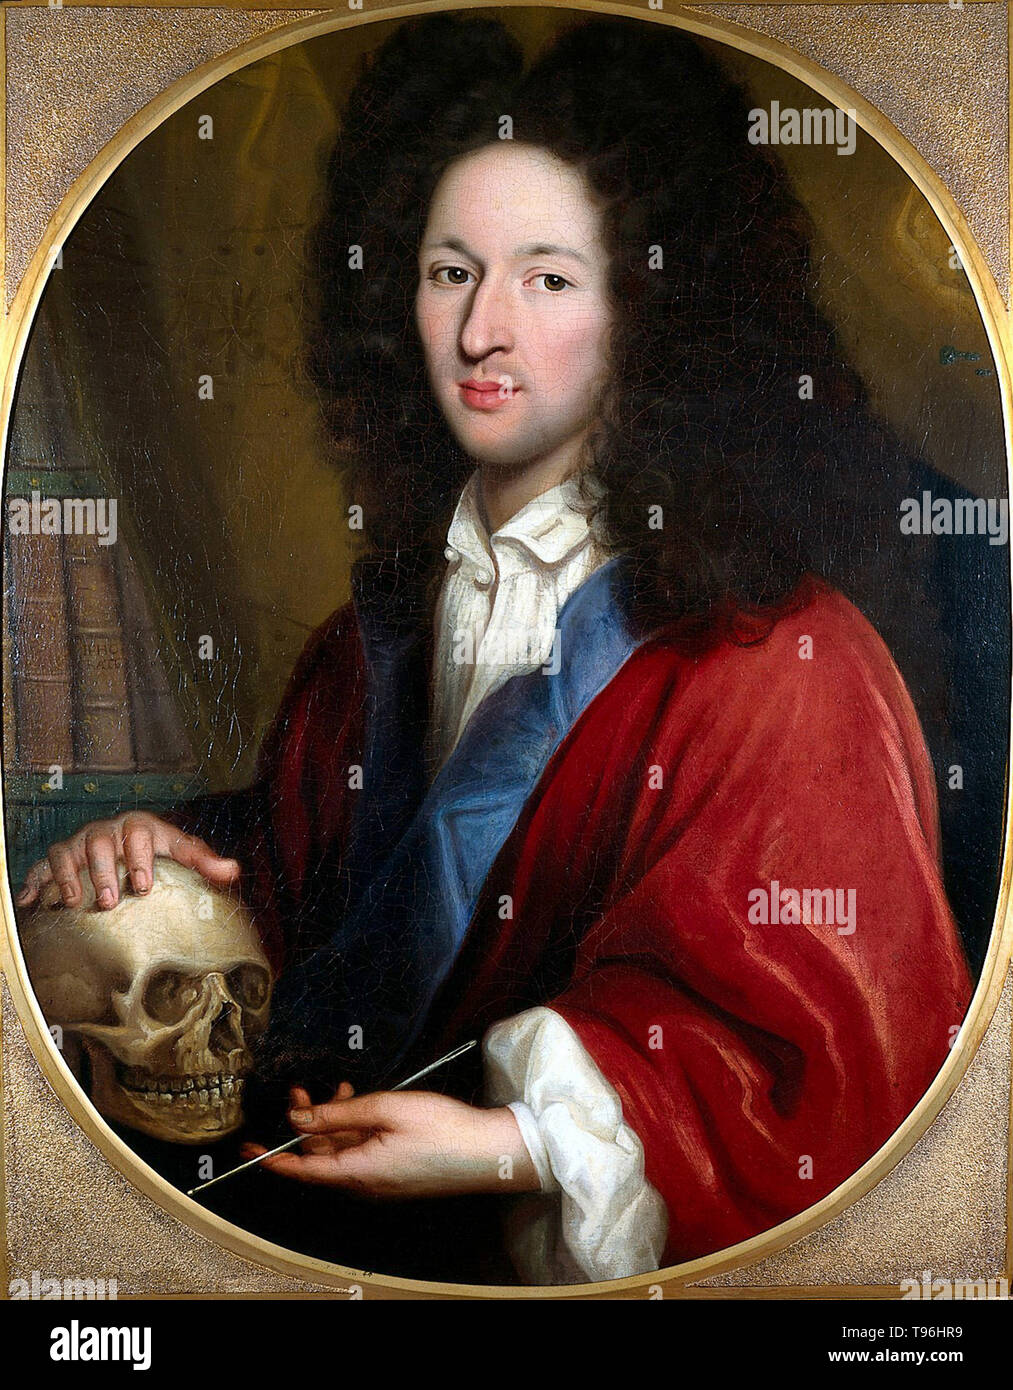 Painting of a man with a surgical instrument and a skull, said to be Bernhard Siegfried Albinus (1697-1770) a German-born Dutch anatomist. Albinus is best known for his monumental anatomical text, Tabulae sceleti et musculorum corporis humani, which was first published in Leiden in 1747, largely at his own expense. Stock Photo